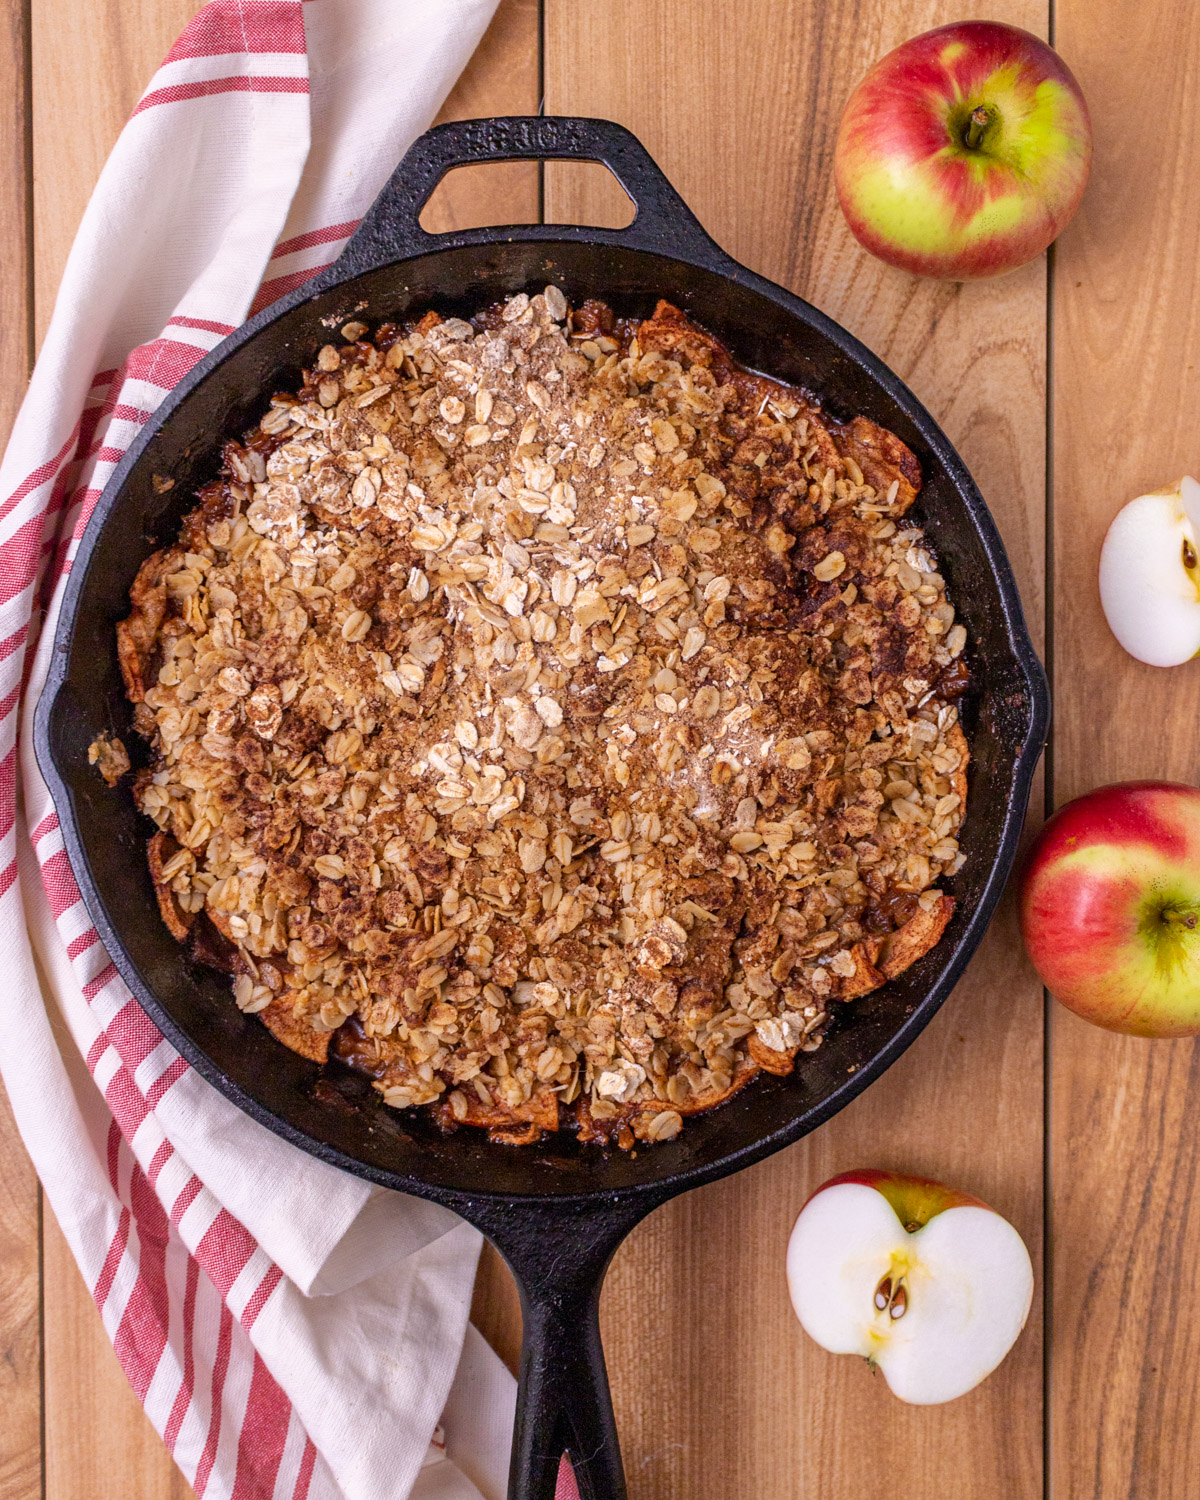 Baked apple crisp in a cast iron skillet with a red and white napkin and cut up raw apples.